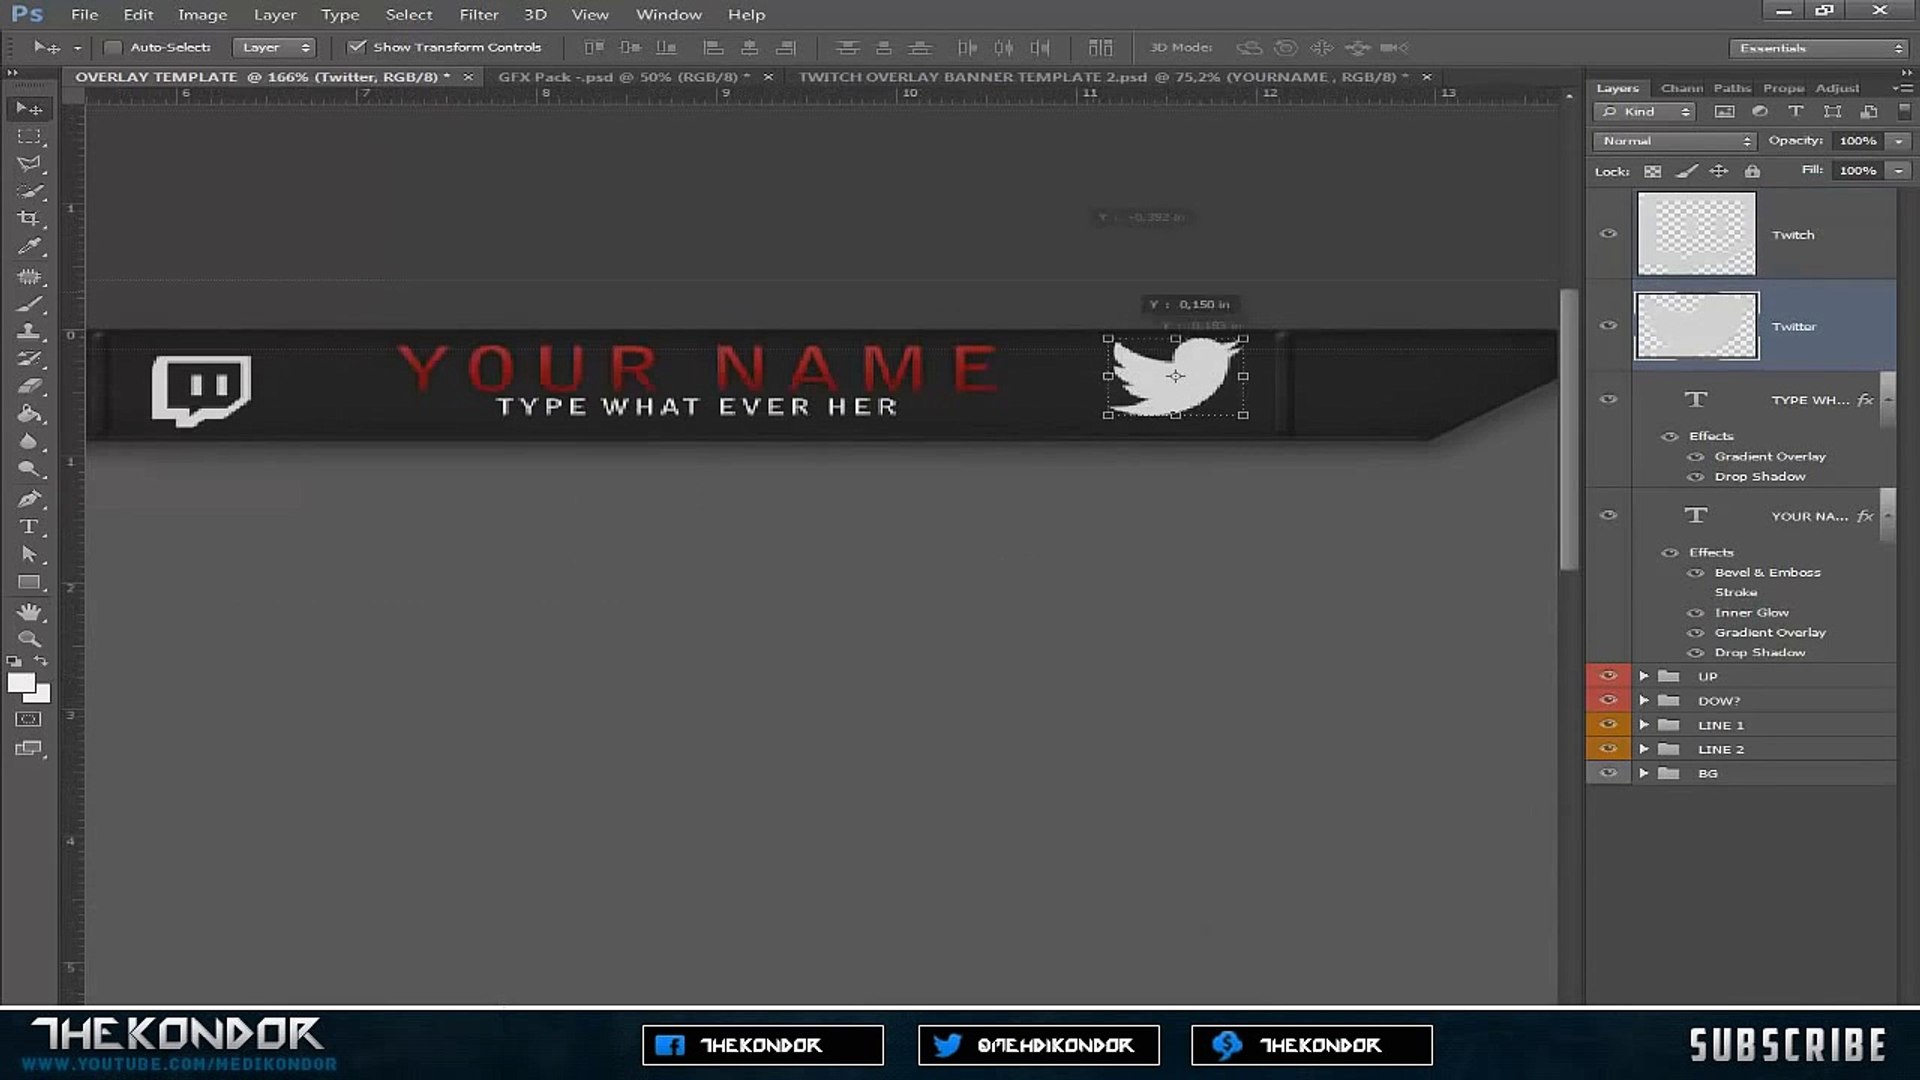 Twitch Overlay Banner Template Free Psd 14 Hd 2 Video Dailymotion